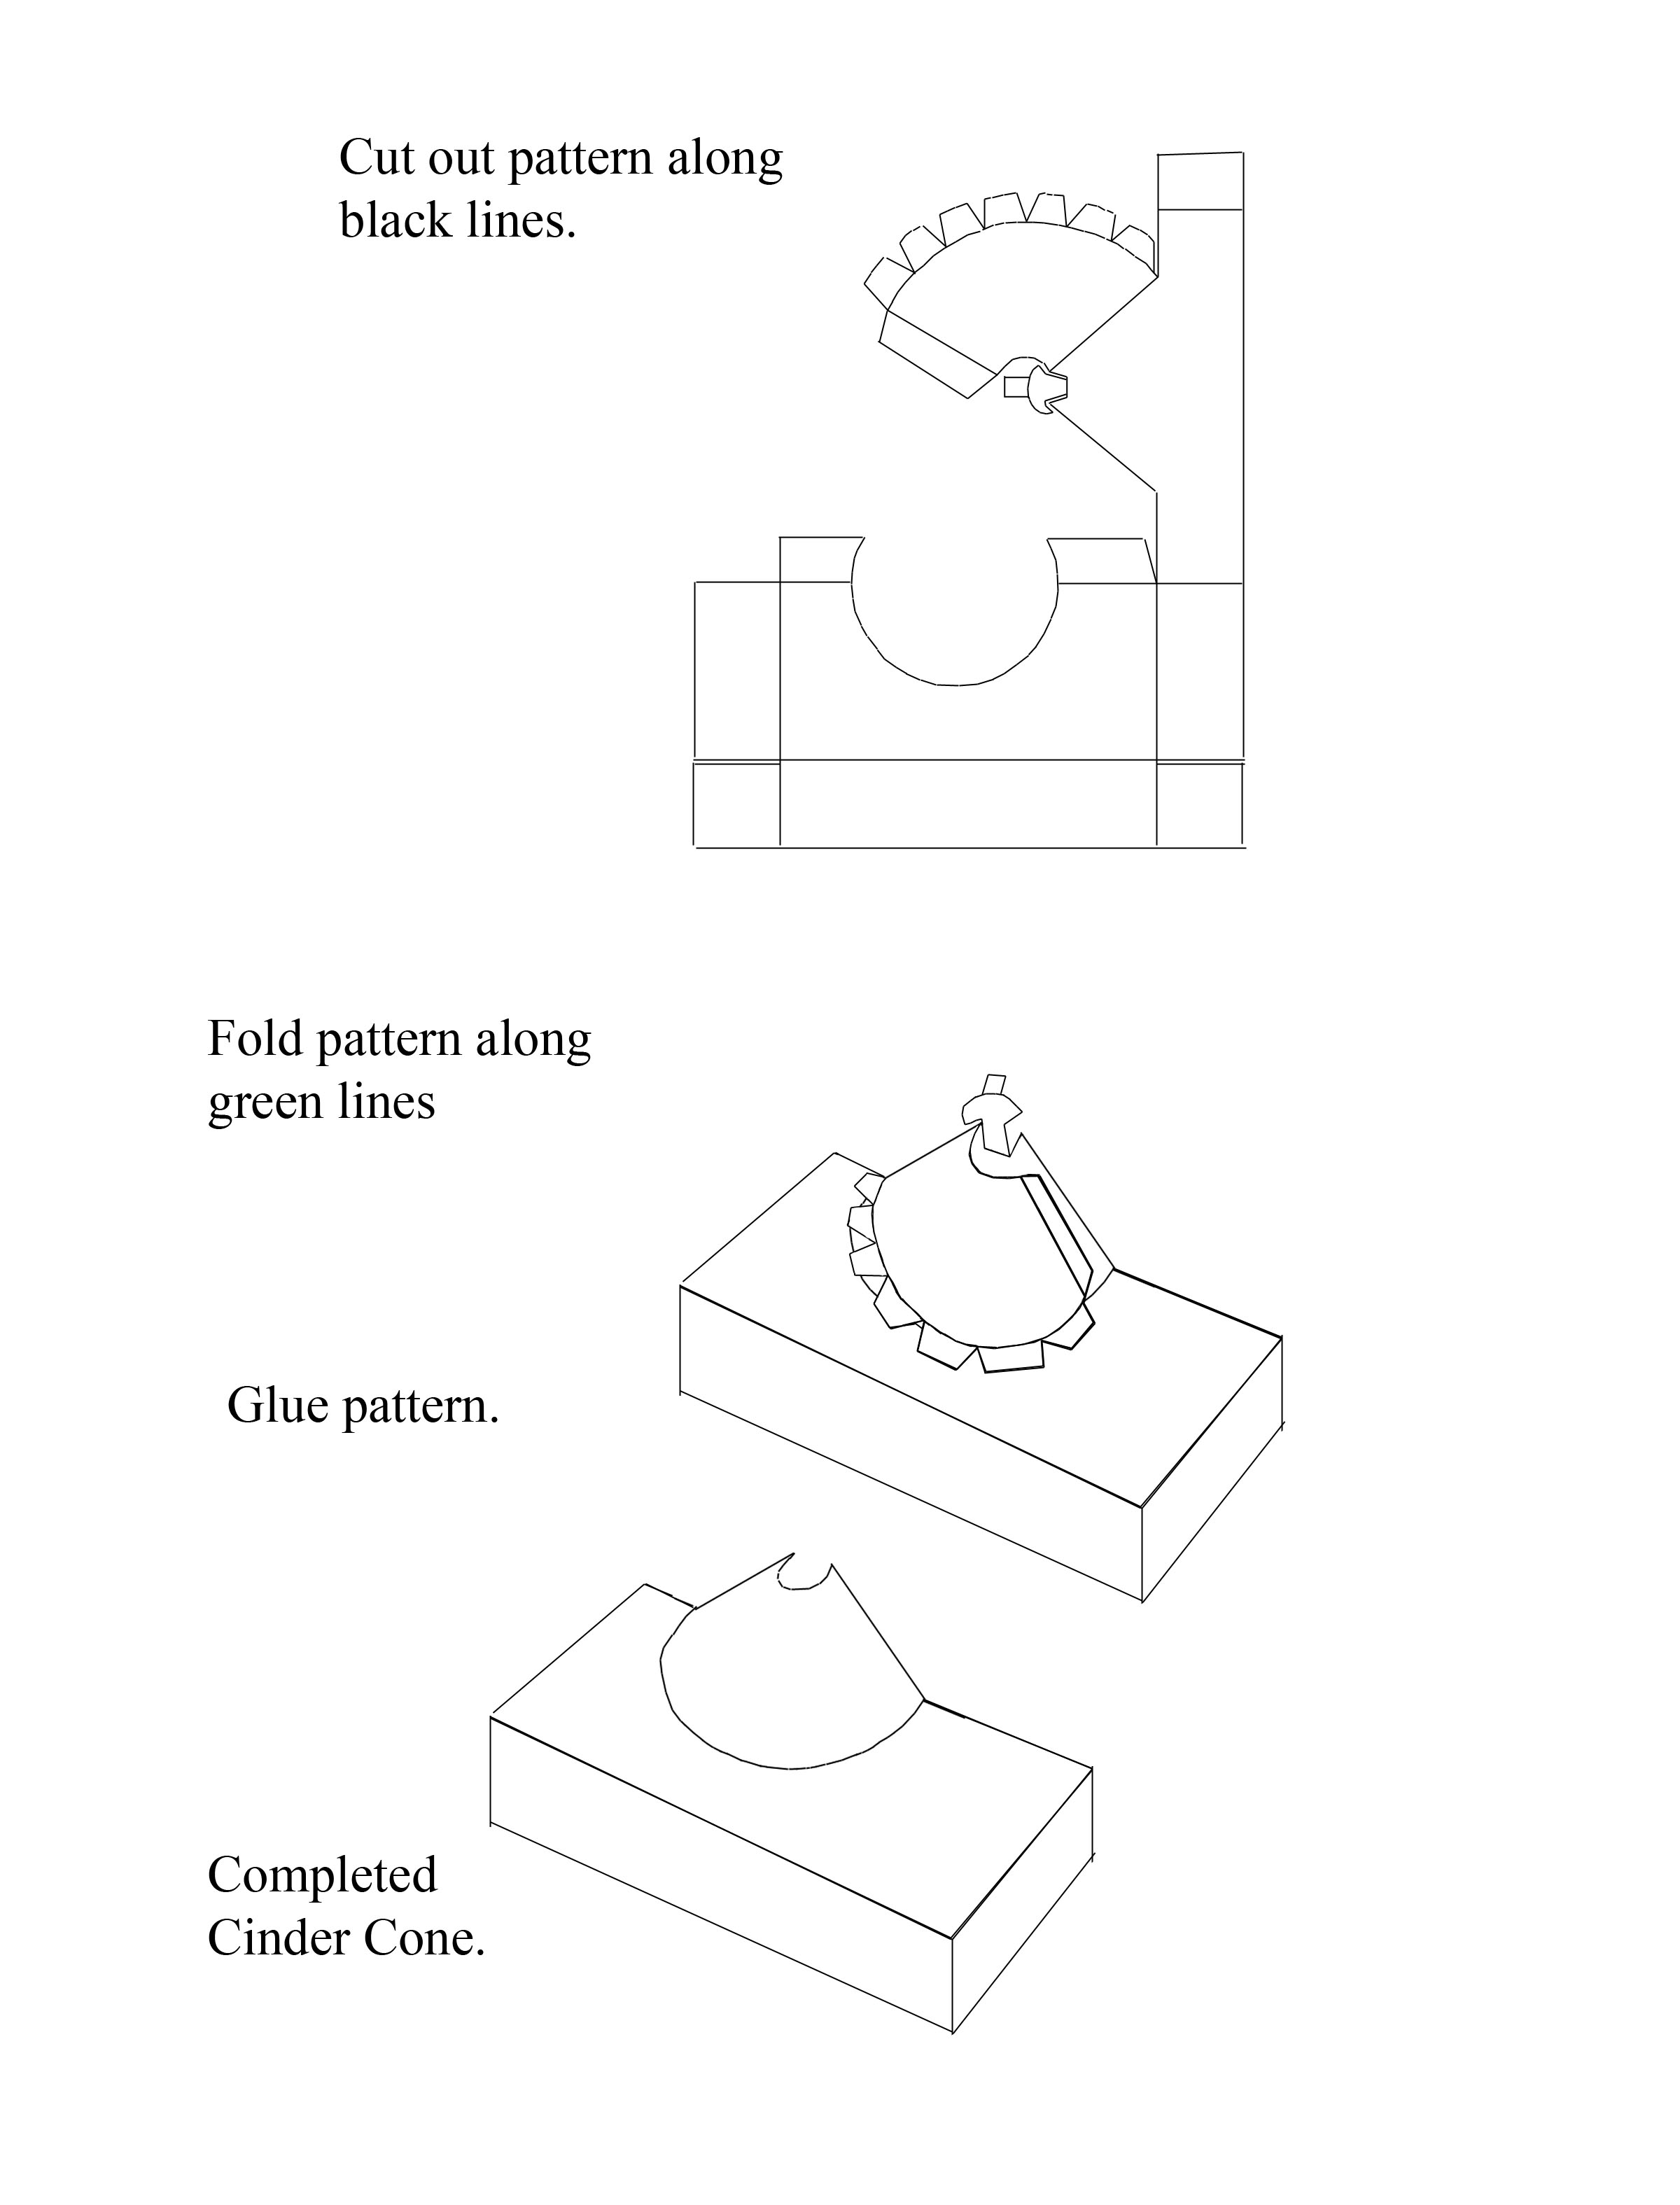 instructions for cinder cone cut-out